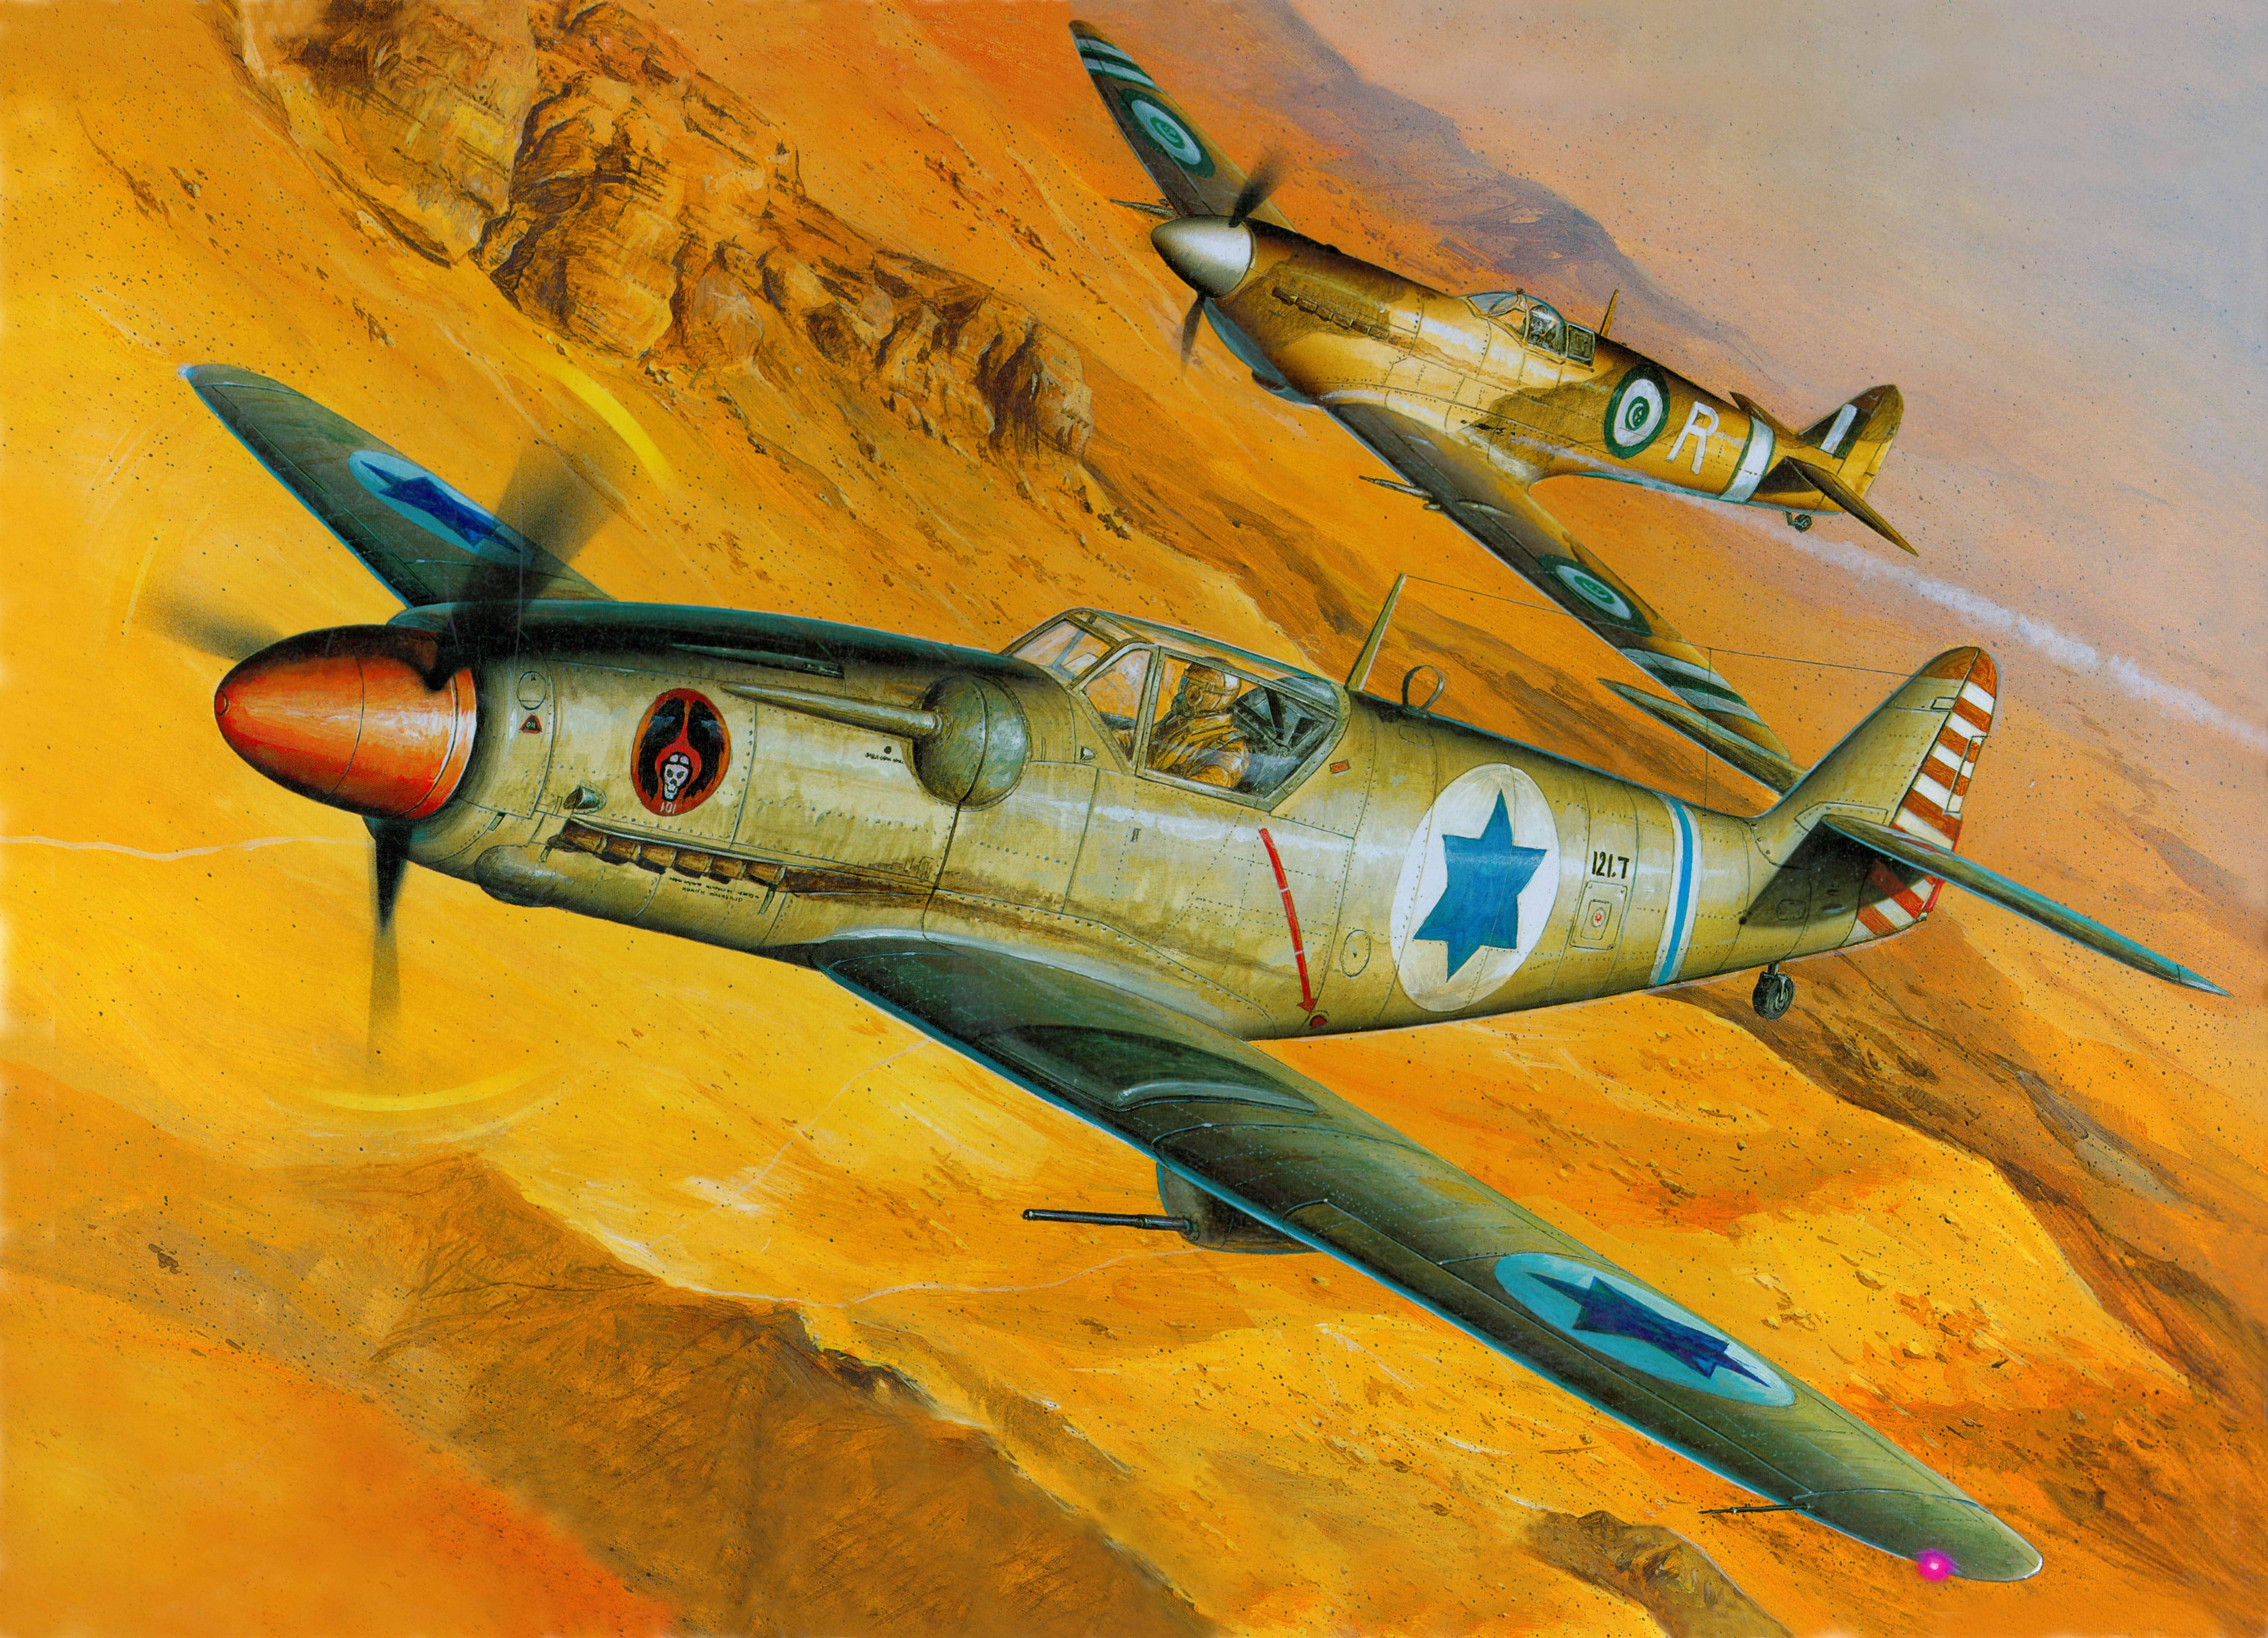 General 5303x3829 World War II airplane artwork Supermarine Spitfire Avia S-199 military aircraft military vehicle vehicle military aircraft Israel Israeli Jewish Boxart Star of David Israel Defense Forces Israeli Air Force Middle East Egyptian Egypt air force British aircraft Supermarine